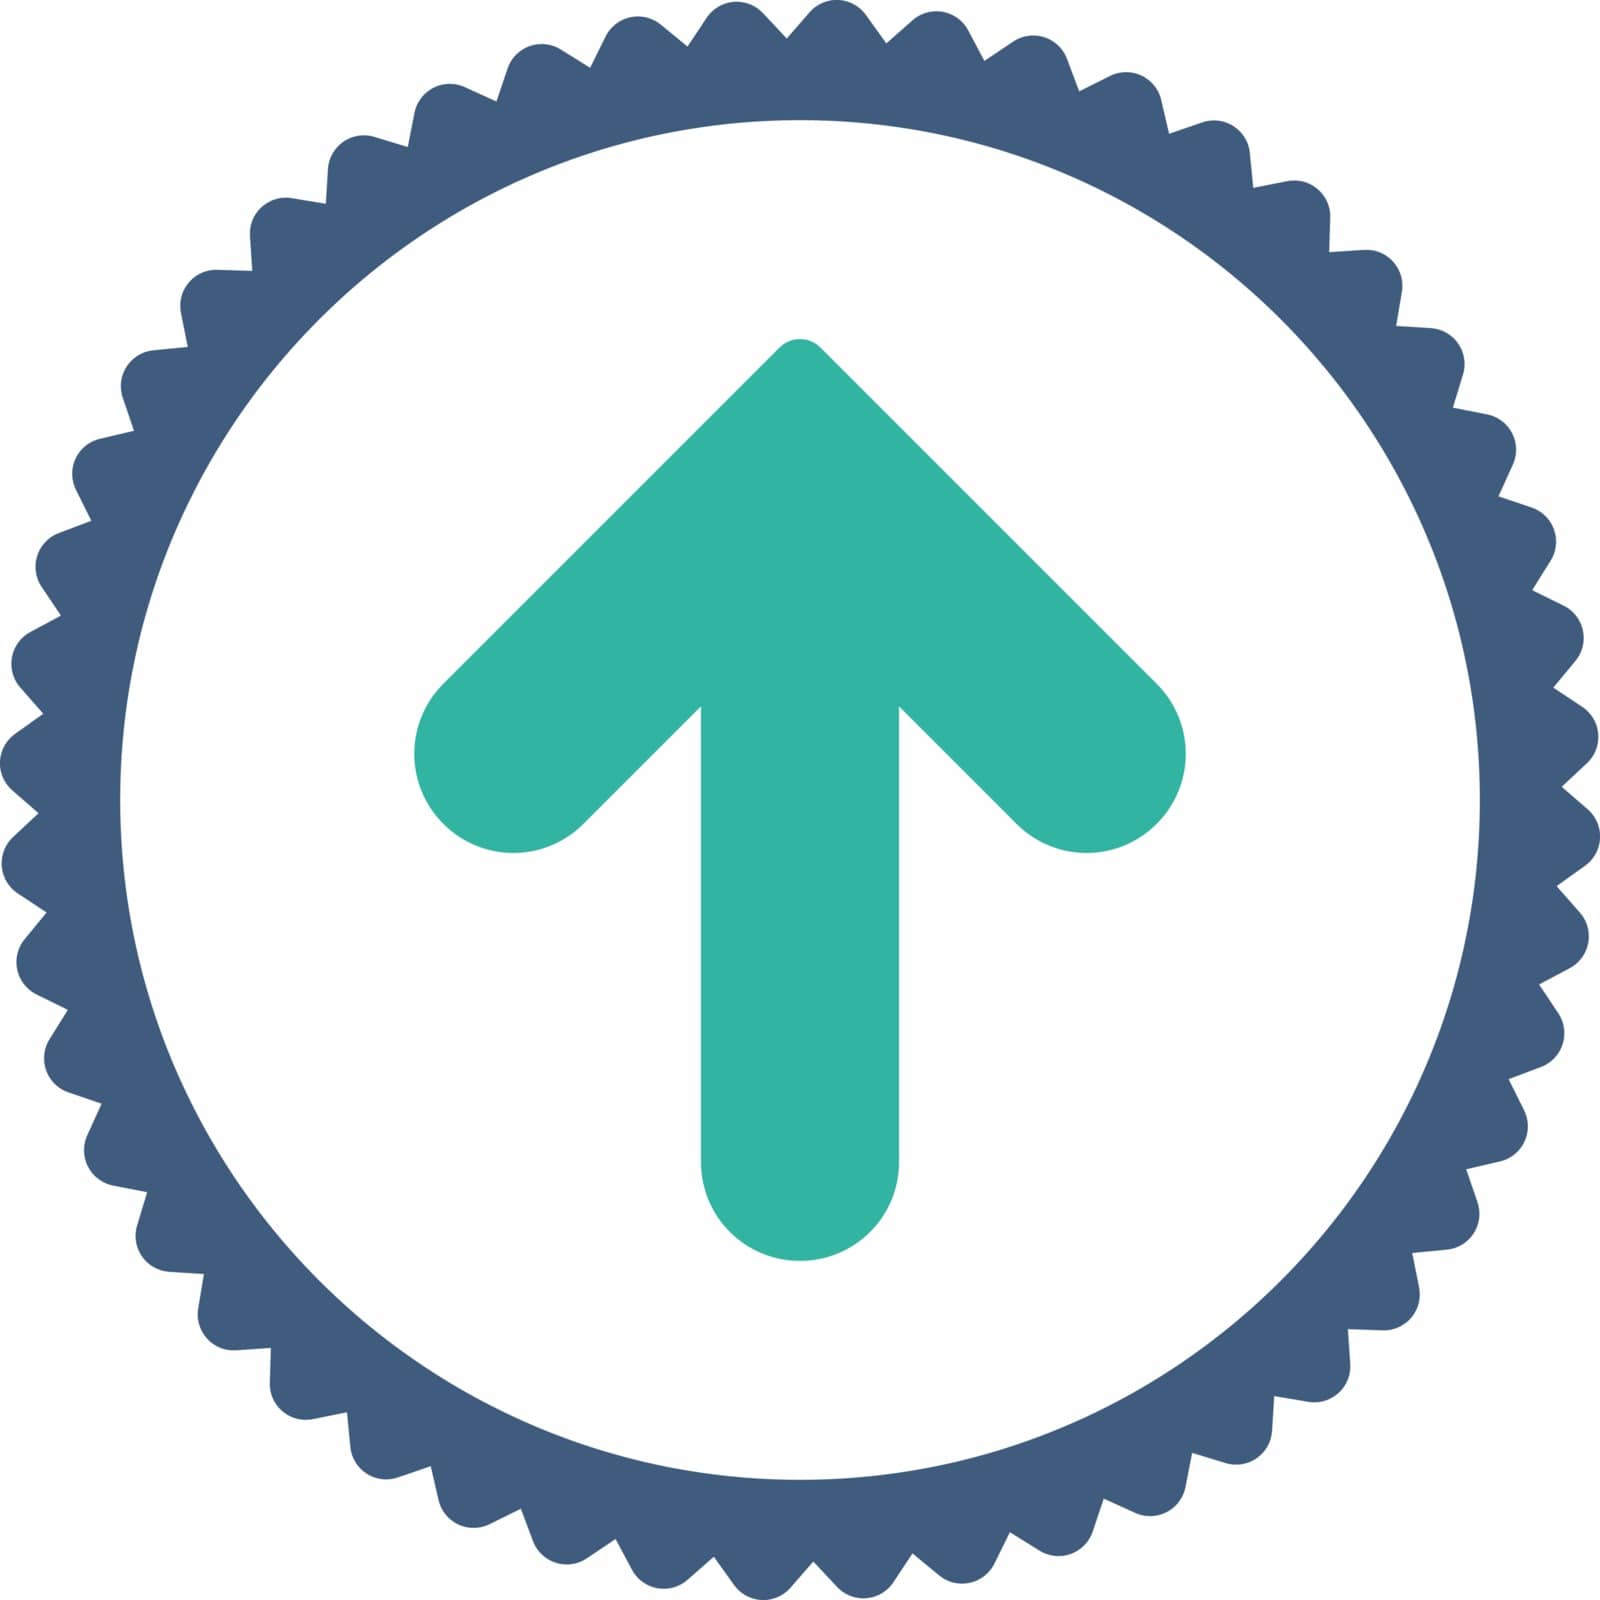 Arrow Up round stamp icon. This flat vector symbol is drawn with cobalt and cyan colors on a white background.